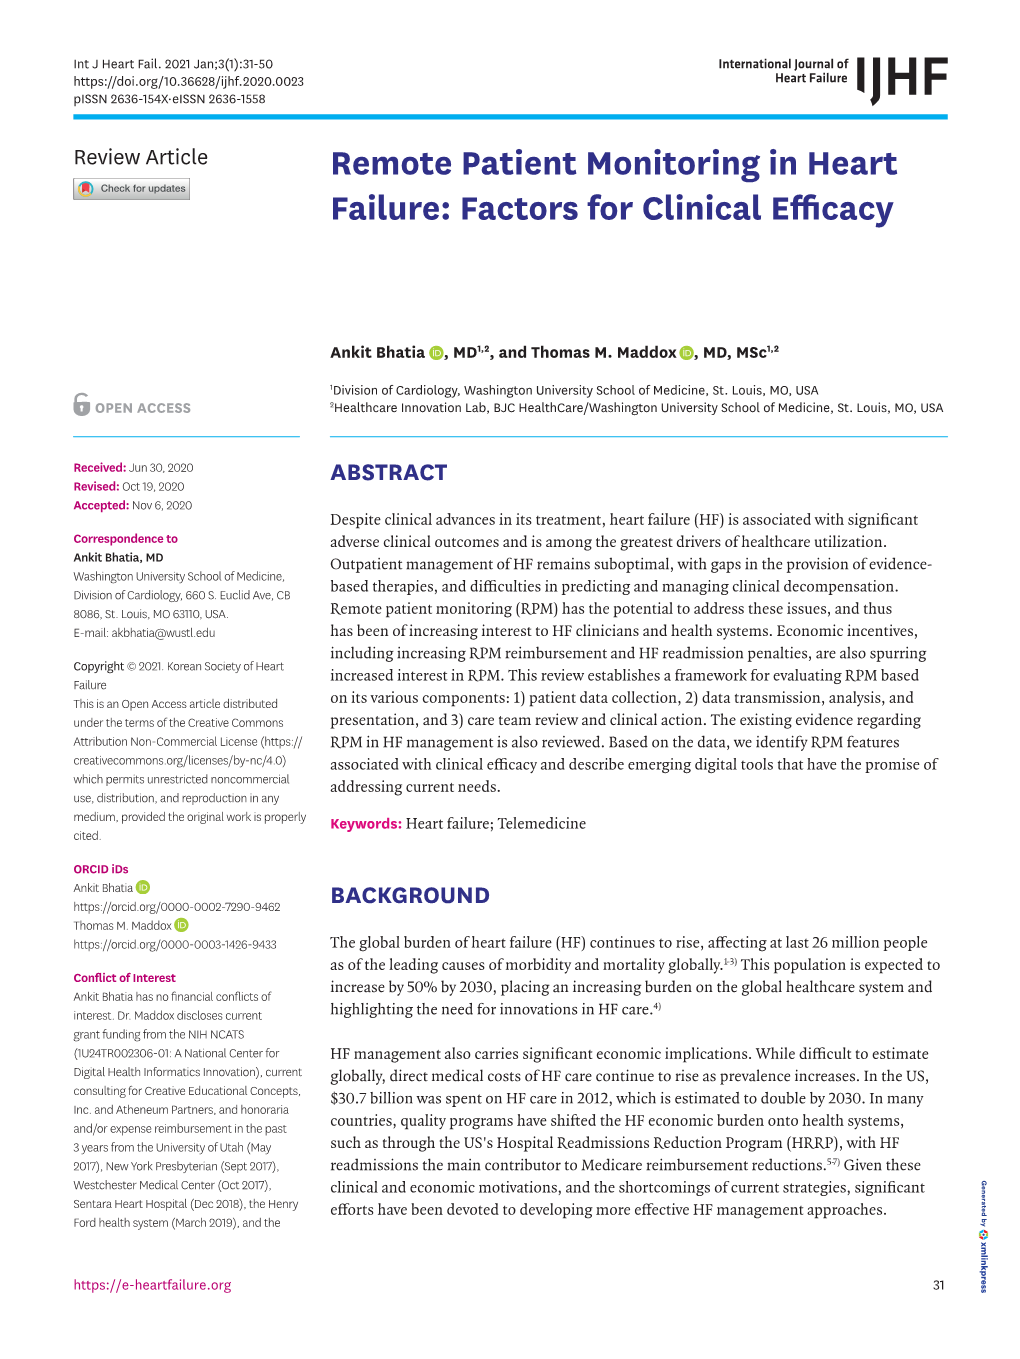 Remote Patient Monitoring in Heart Failure: Factors for Clinical Efficacy